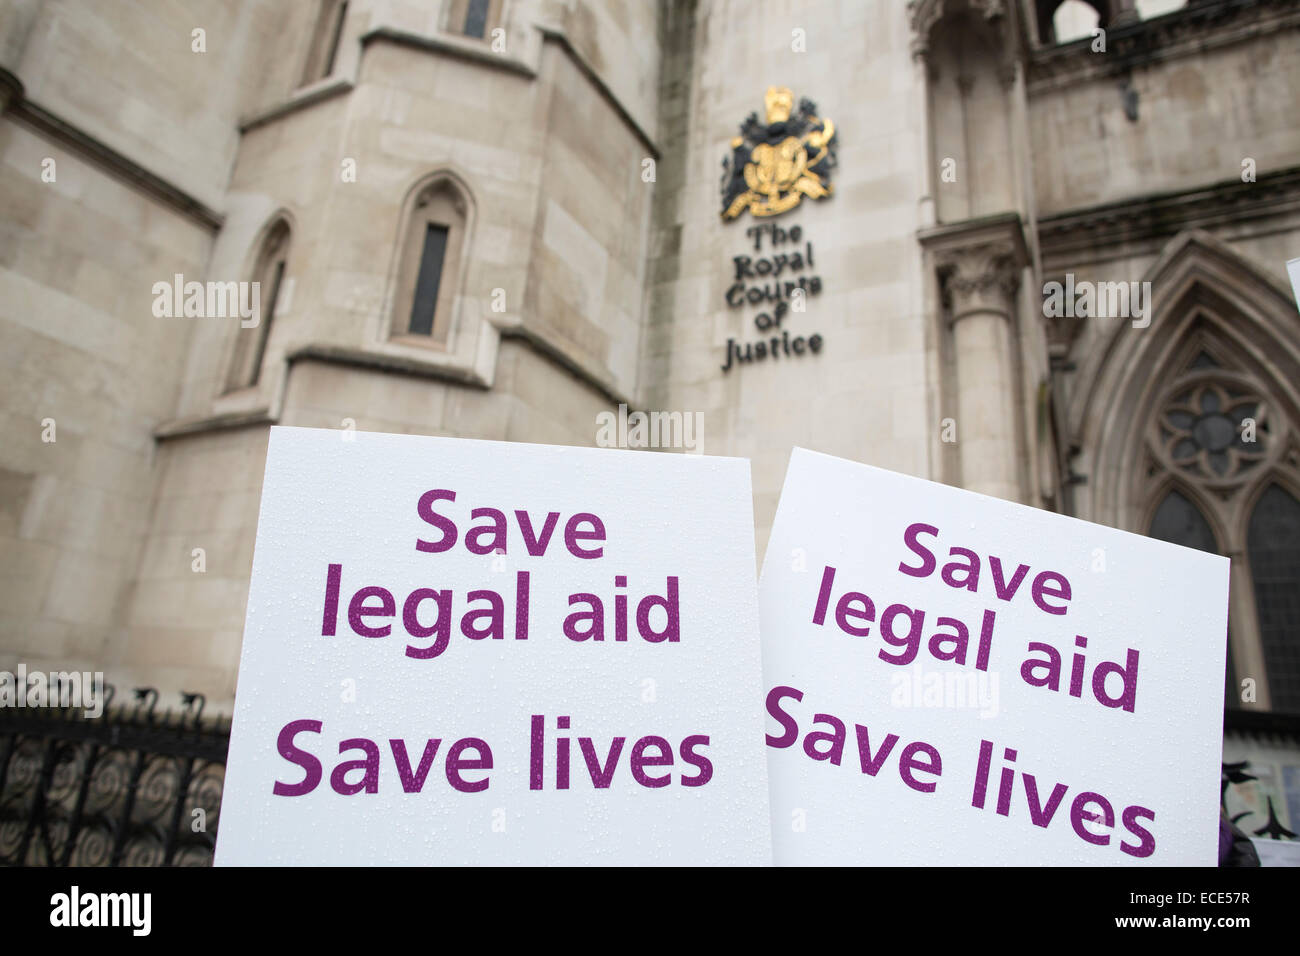 London, UK, 12th Dec, 2014. Woman's Rights Demonstration, Royal Courts of Justice, High Court, London, UK 12.12.2014 Picture shows representatives from Woman's Rights Charities demonstrating outside the Royal Courts of Justice today as a challenge is made over cuts to legal aid impacting on victims of domestic violence. Credit:  Jeff Gilbert/Alamy Live News Stock Photo